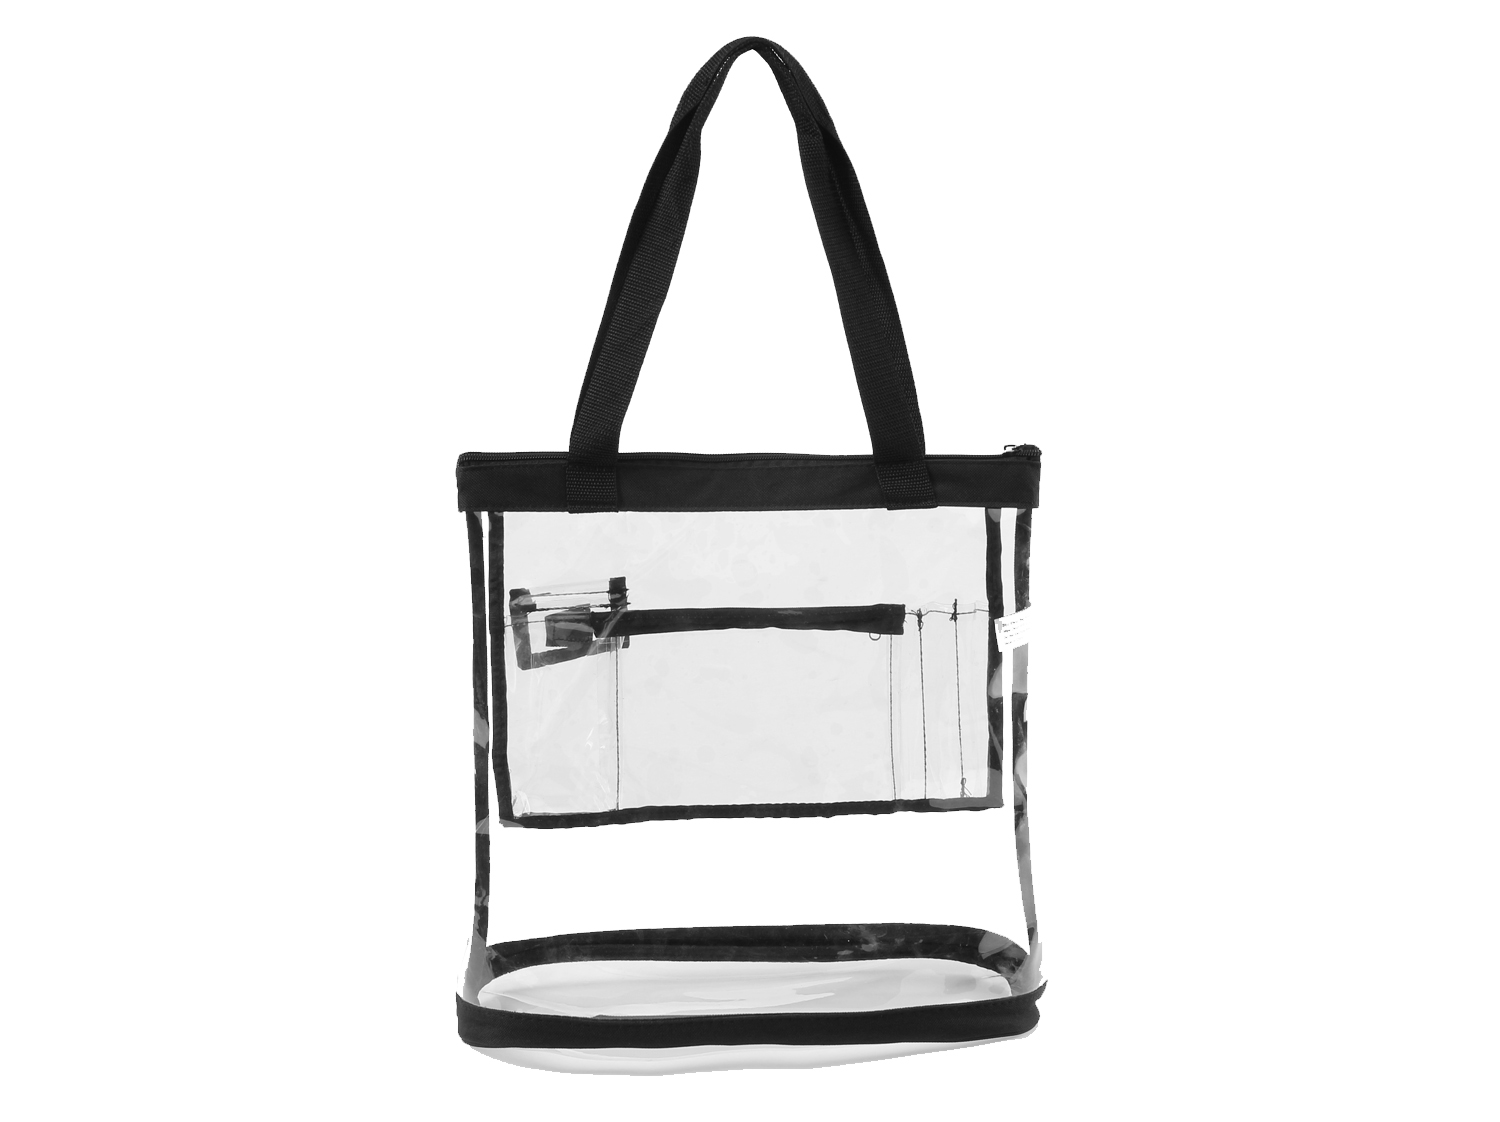 Medium Clear Tote Bag with Zipper - The Clear Bag Store